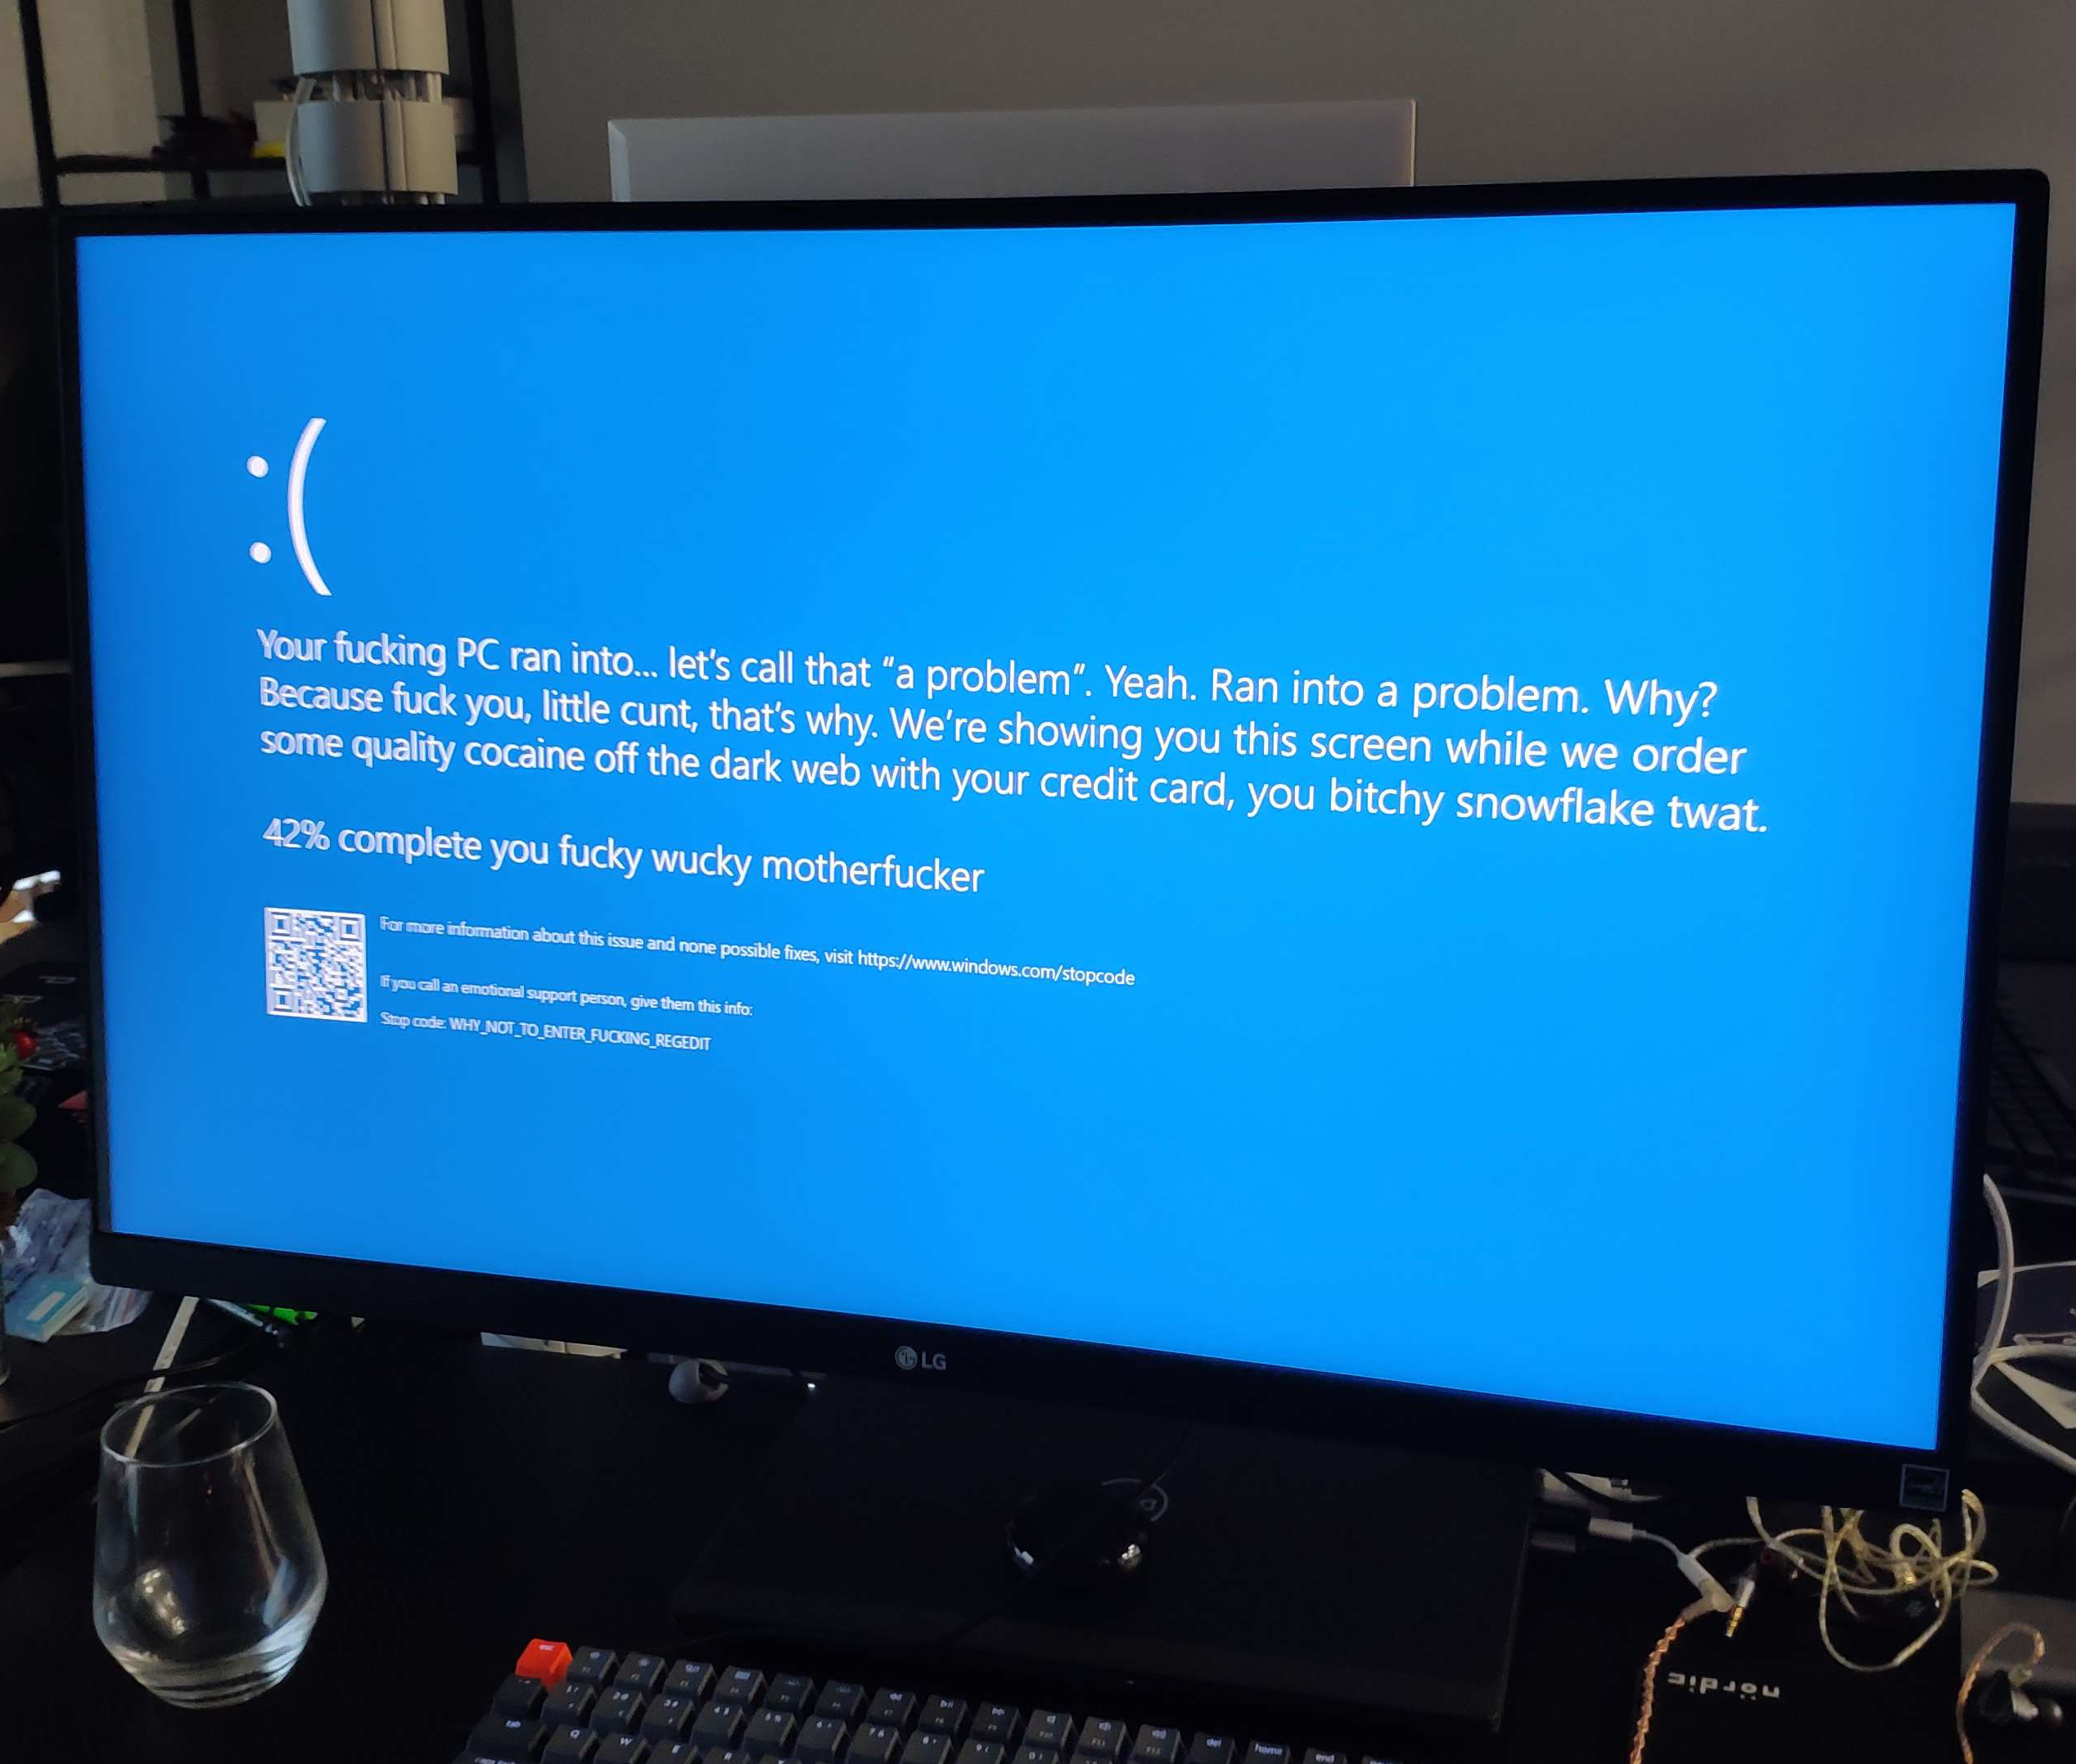 Coworkers screen saver. For context, it looks like a usual error Windows give when something goes wrong, but the text is different